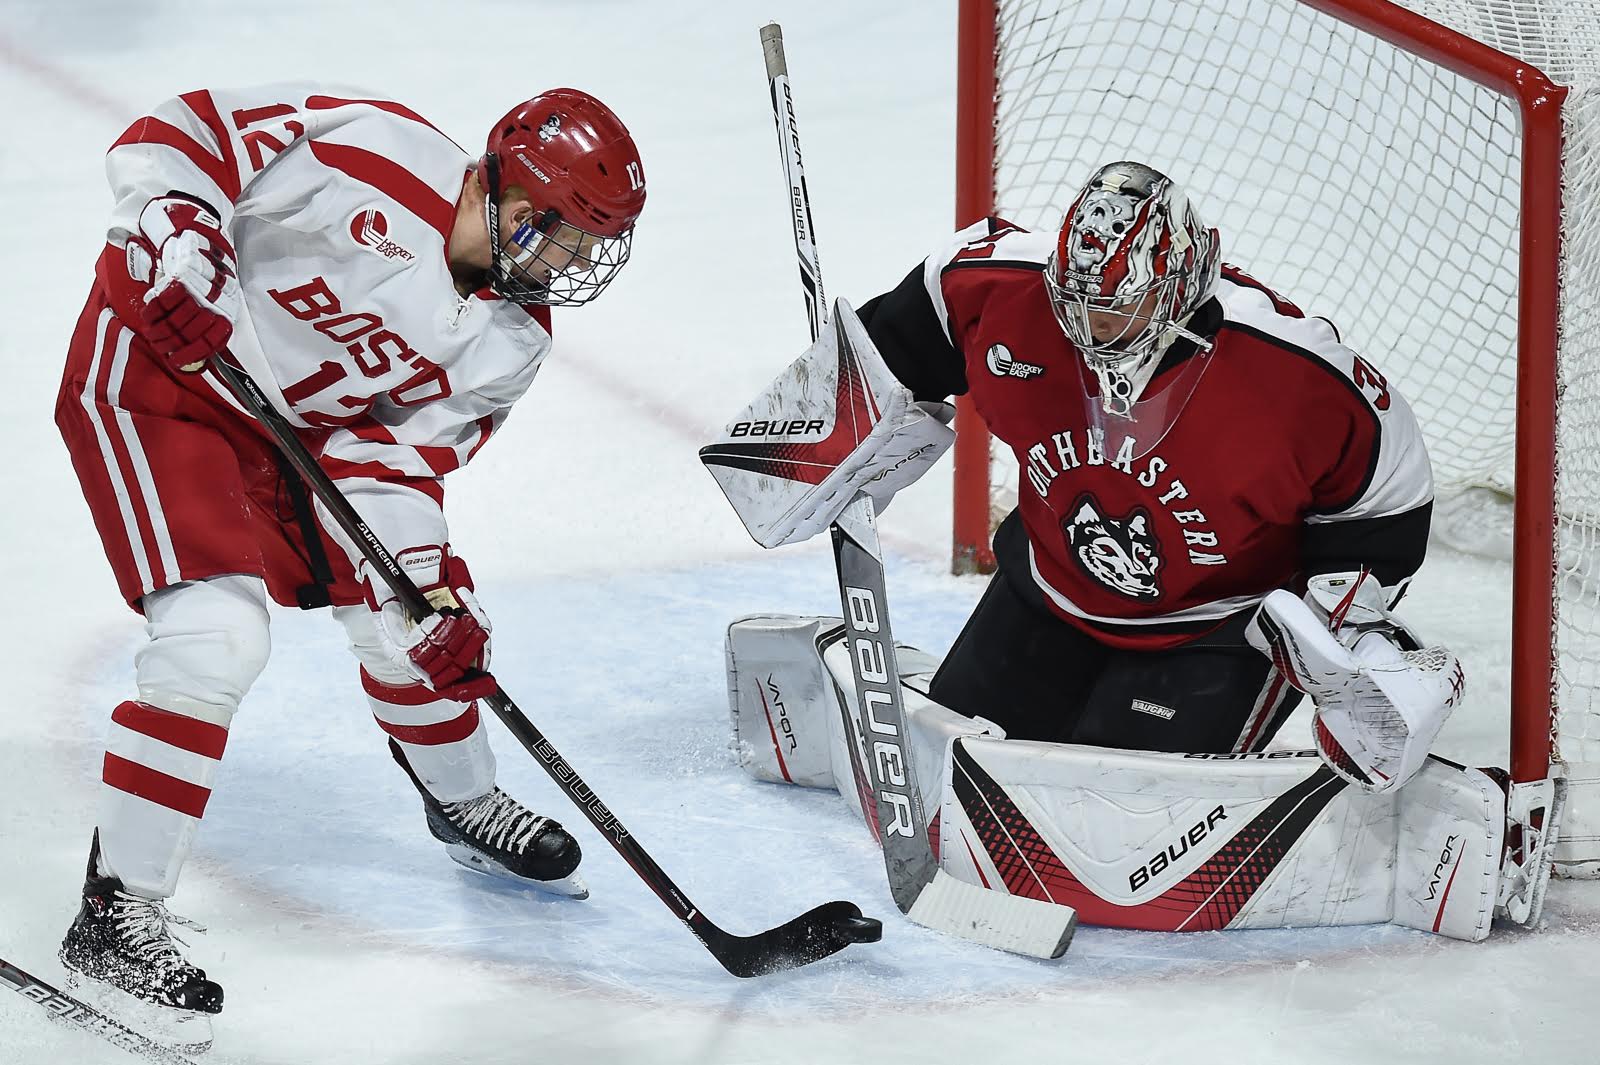 Senior forward Chase Phelps in front of the net against Northeastern University. PHOTO BY MADDIE MALHOTRA/ DAILY FREE PRESS STAFF